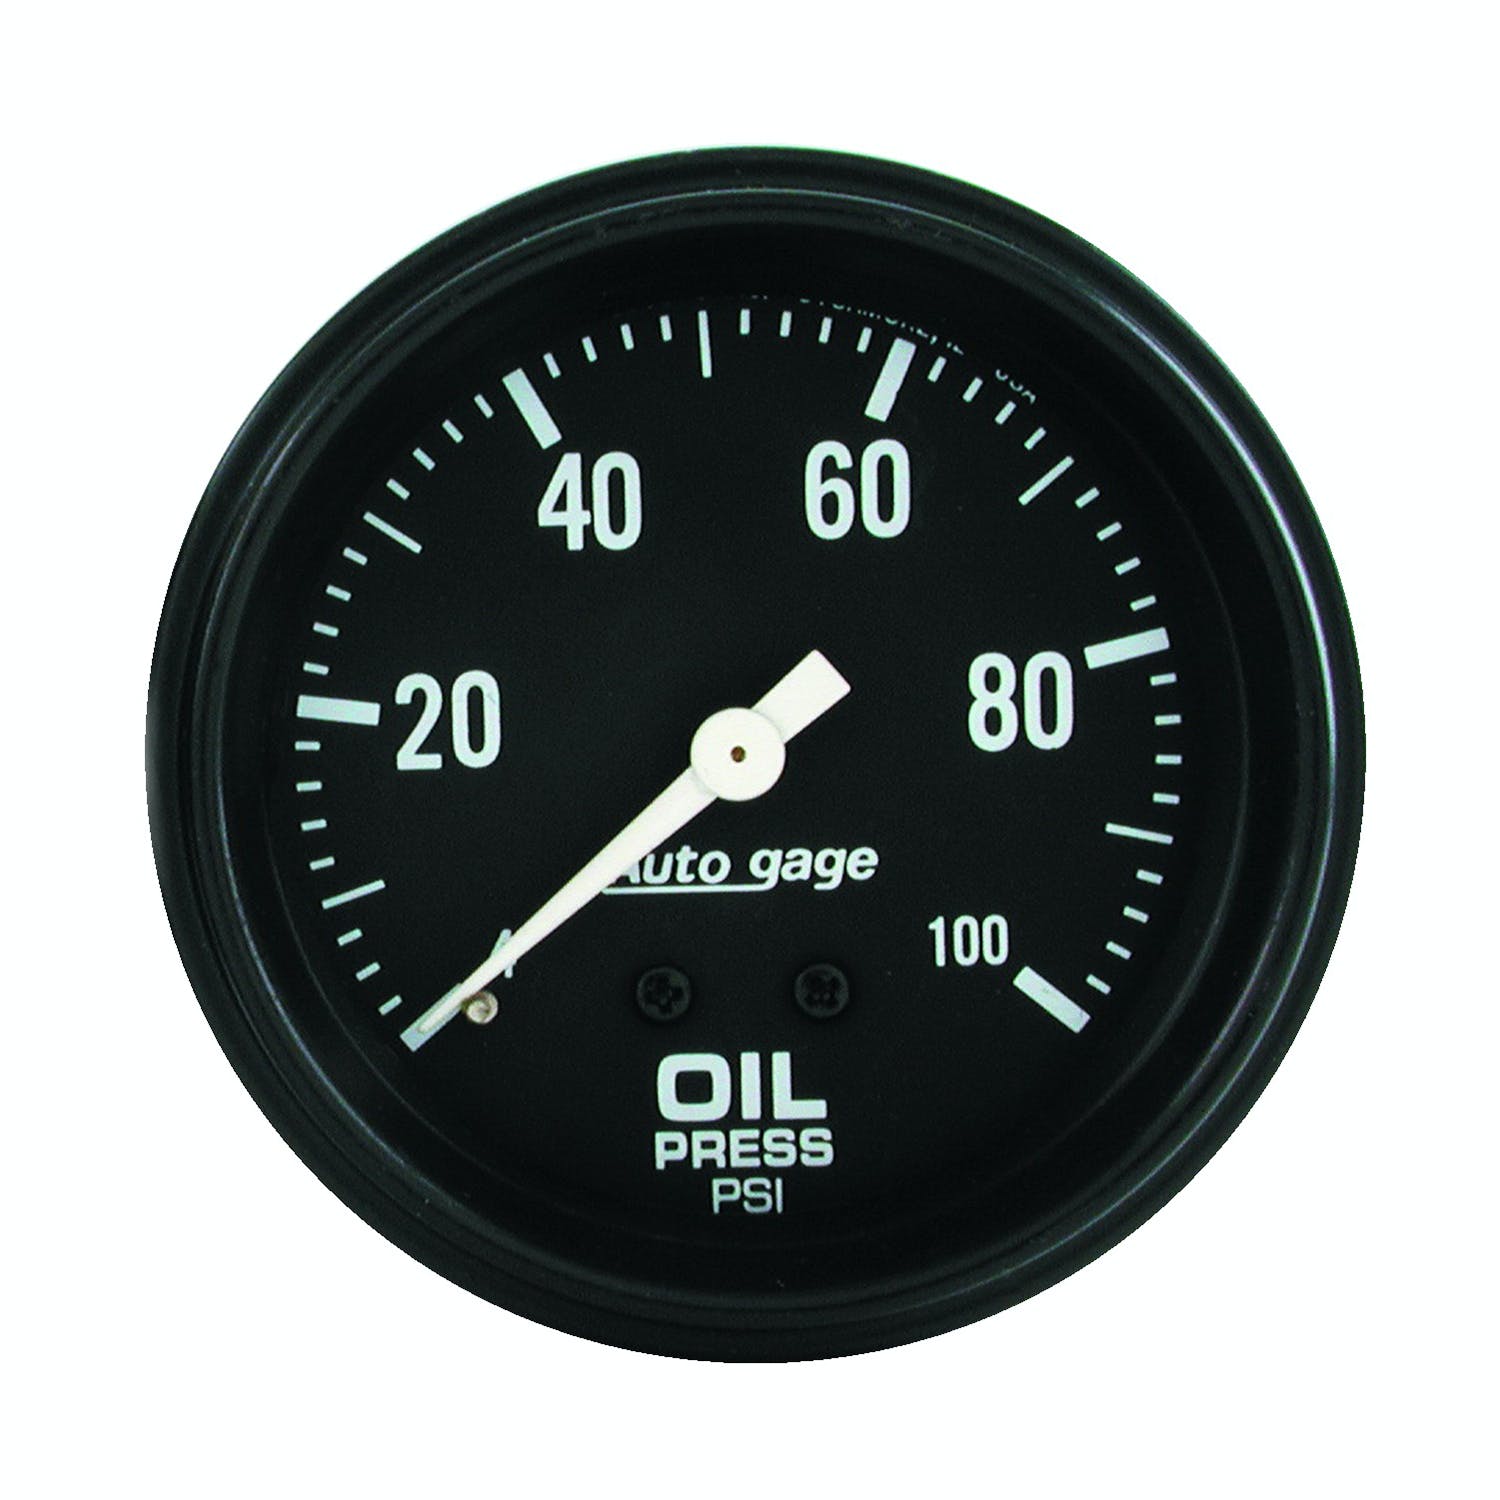 AutoMeter Products 2312 Oil Press Gauge 0-100 PSI